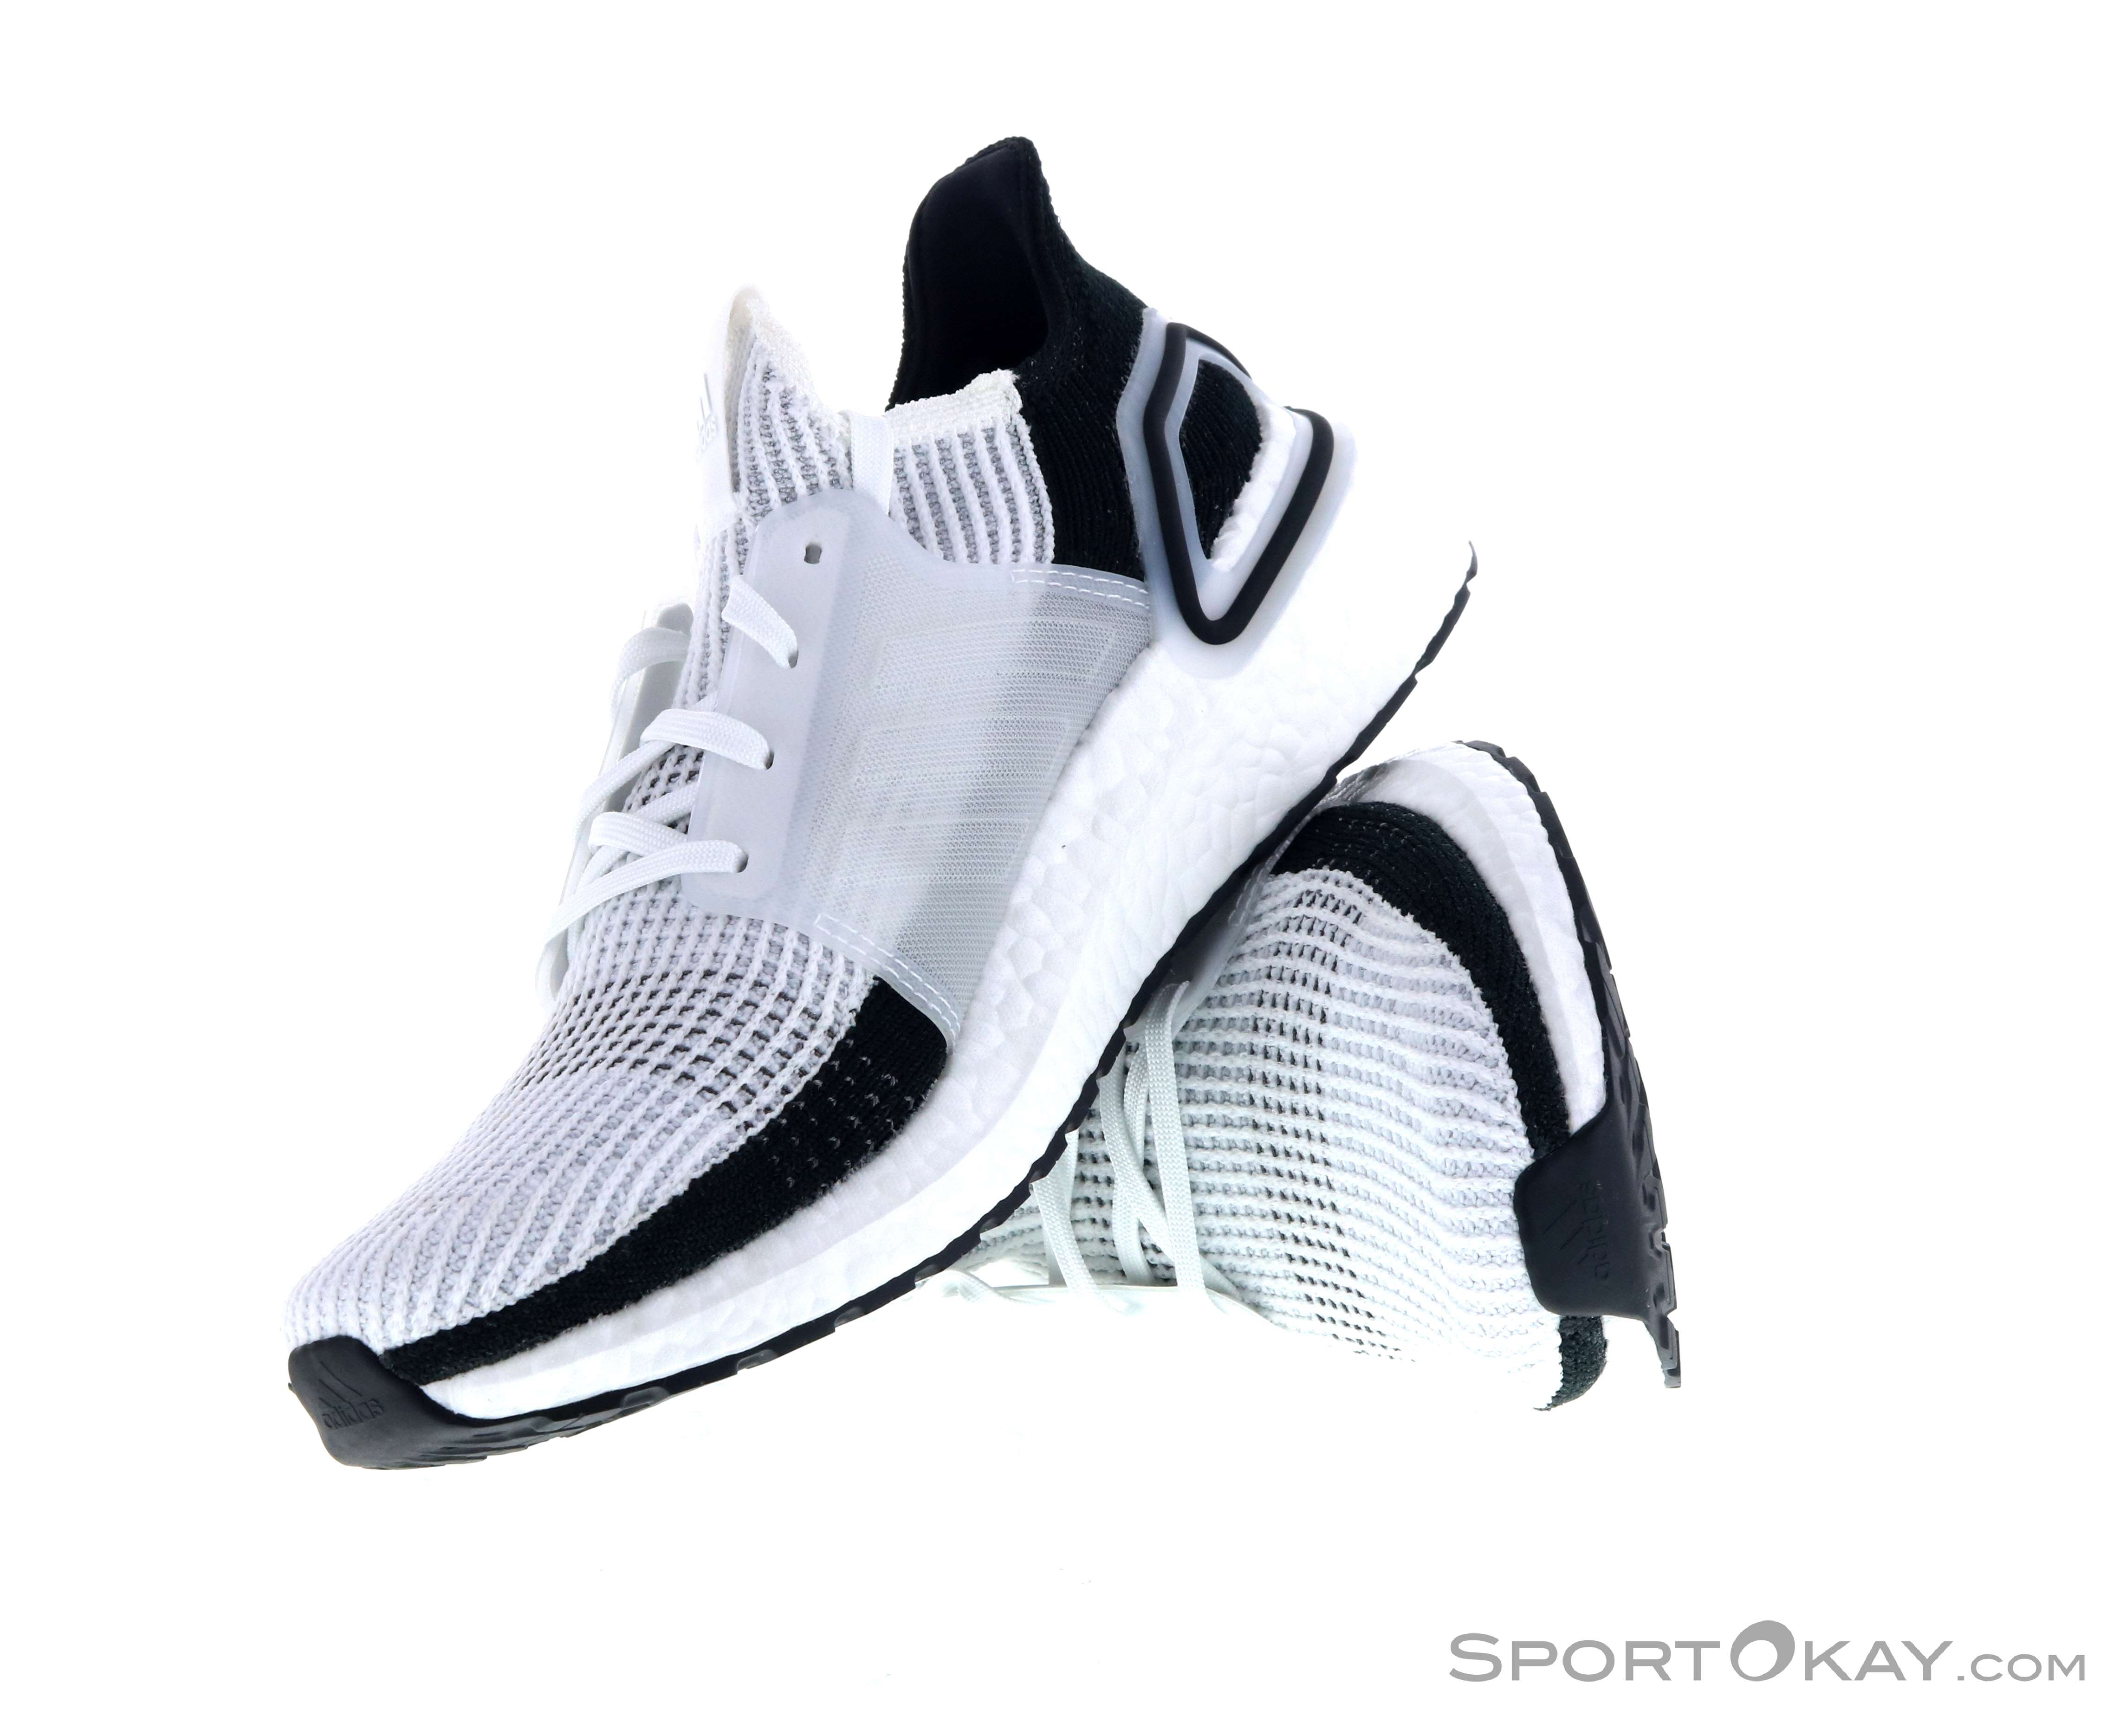 adidas ultra boost 19 mens running shoes